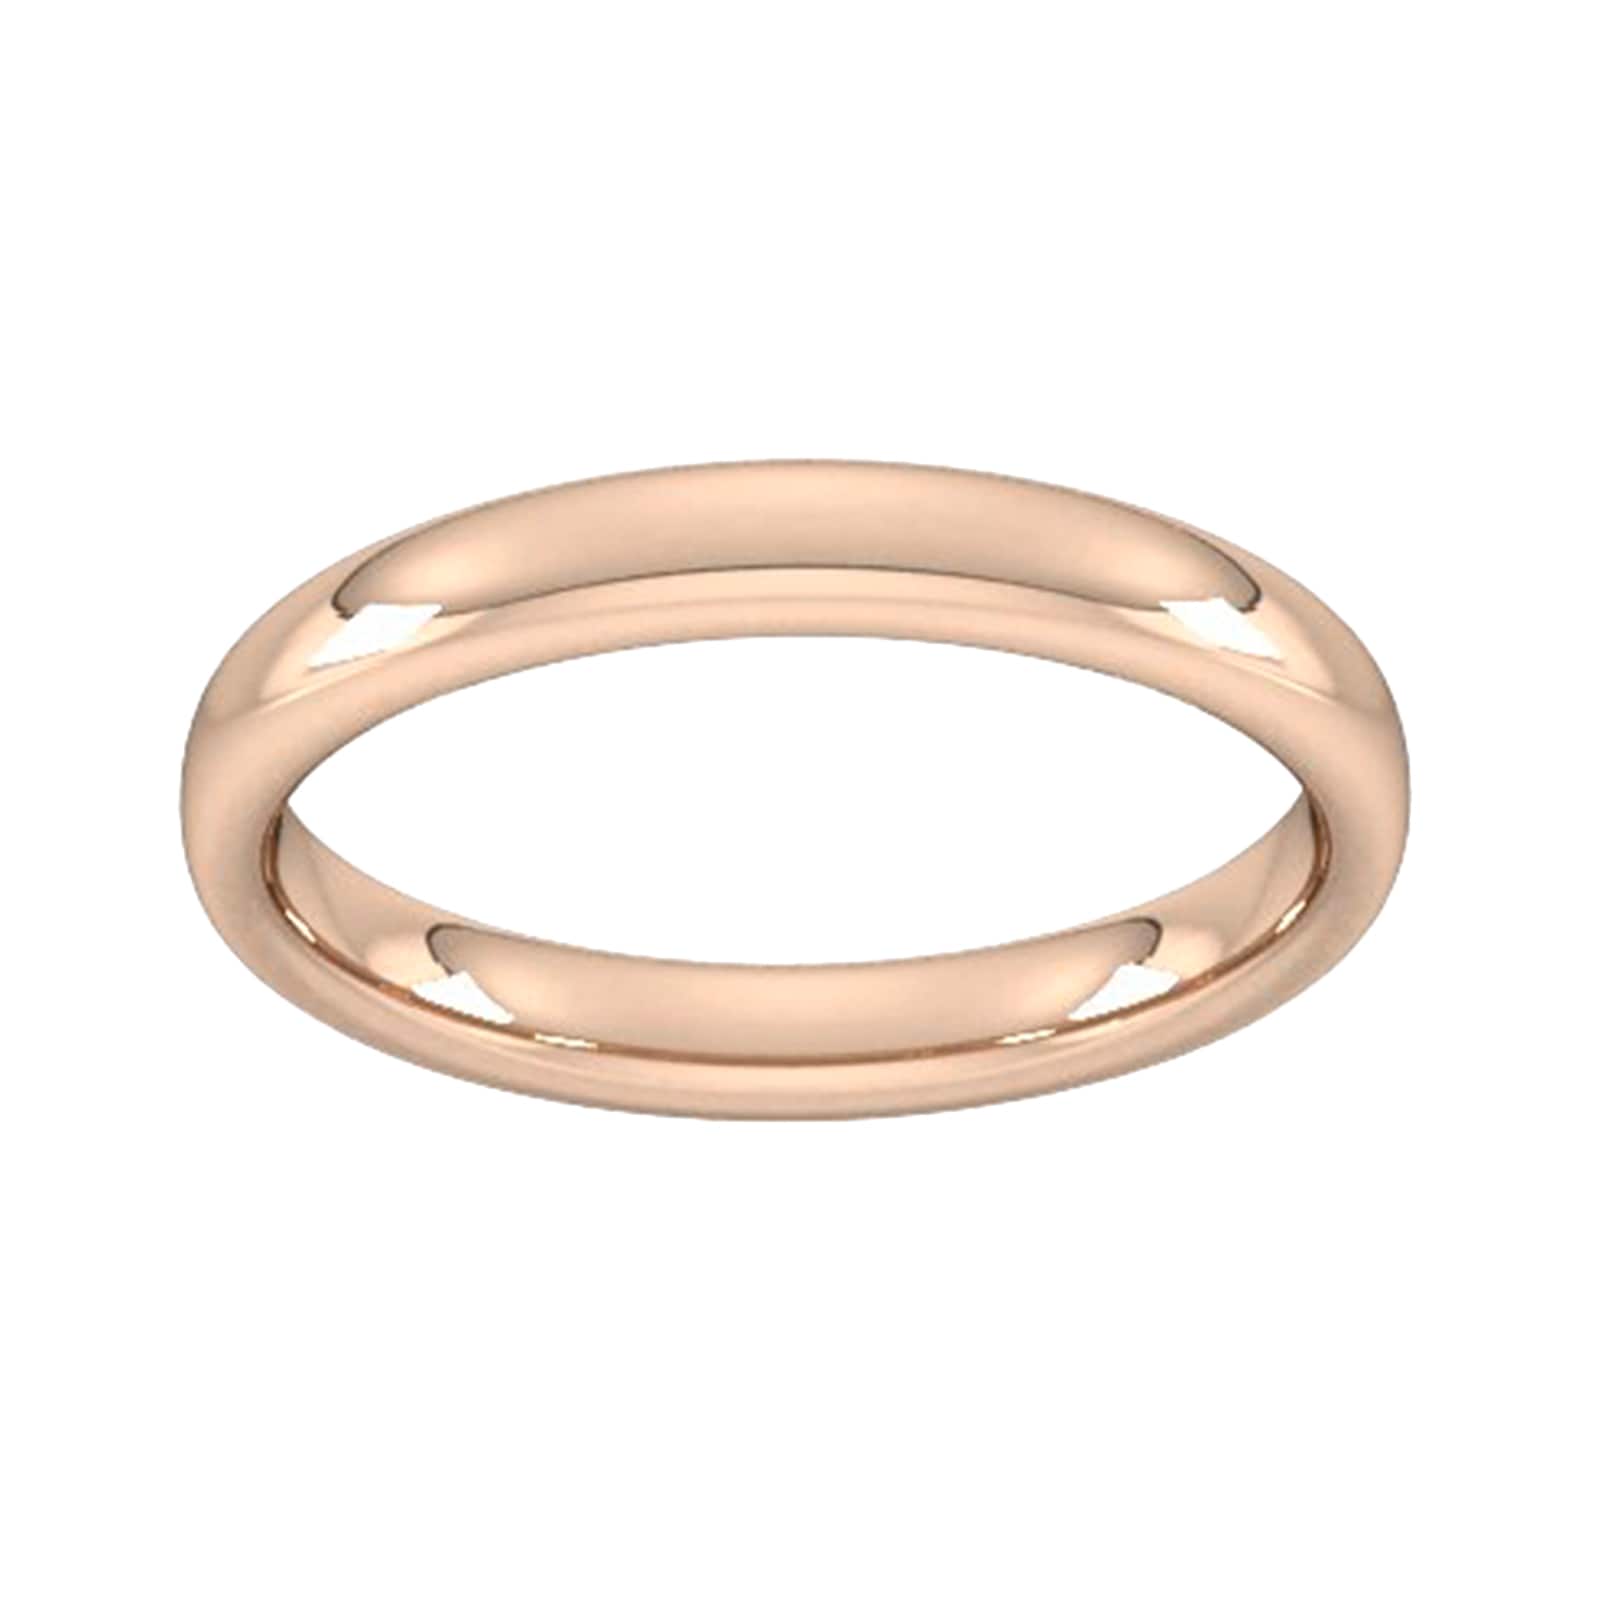 3mm Slight Court Heavy Wedding Ring In 9 Carat Rose Gold - Ring Size R